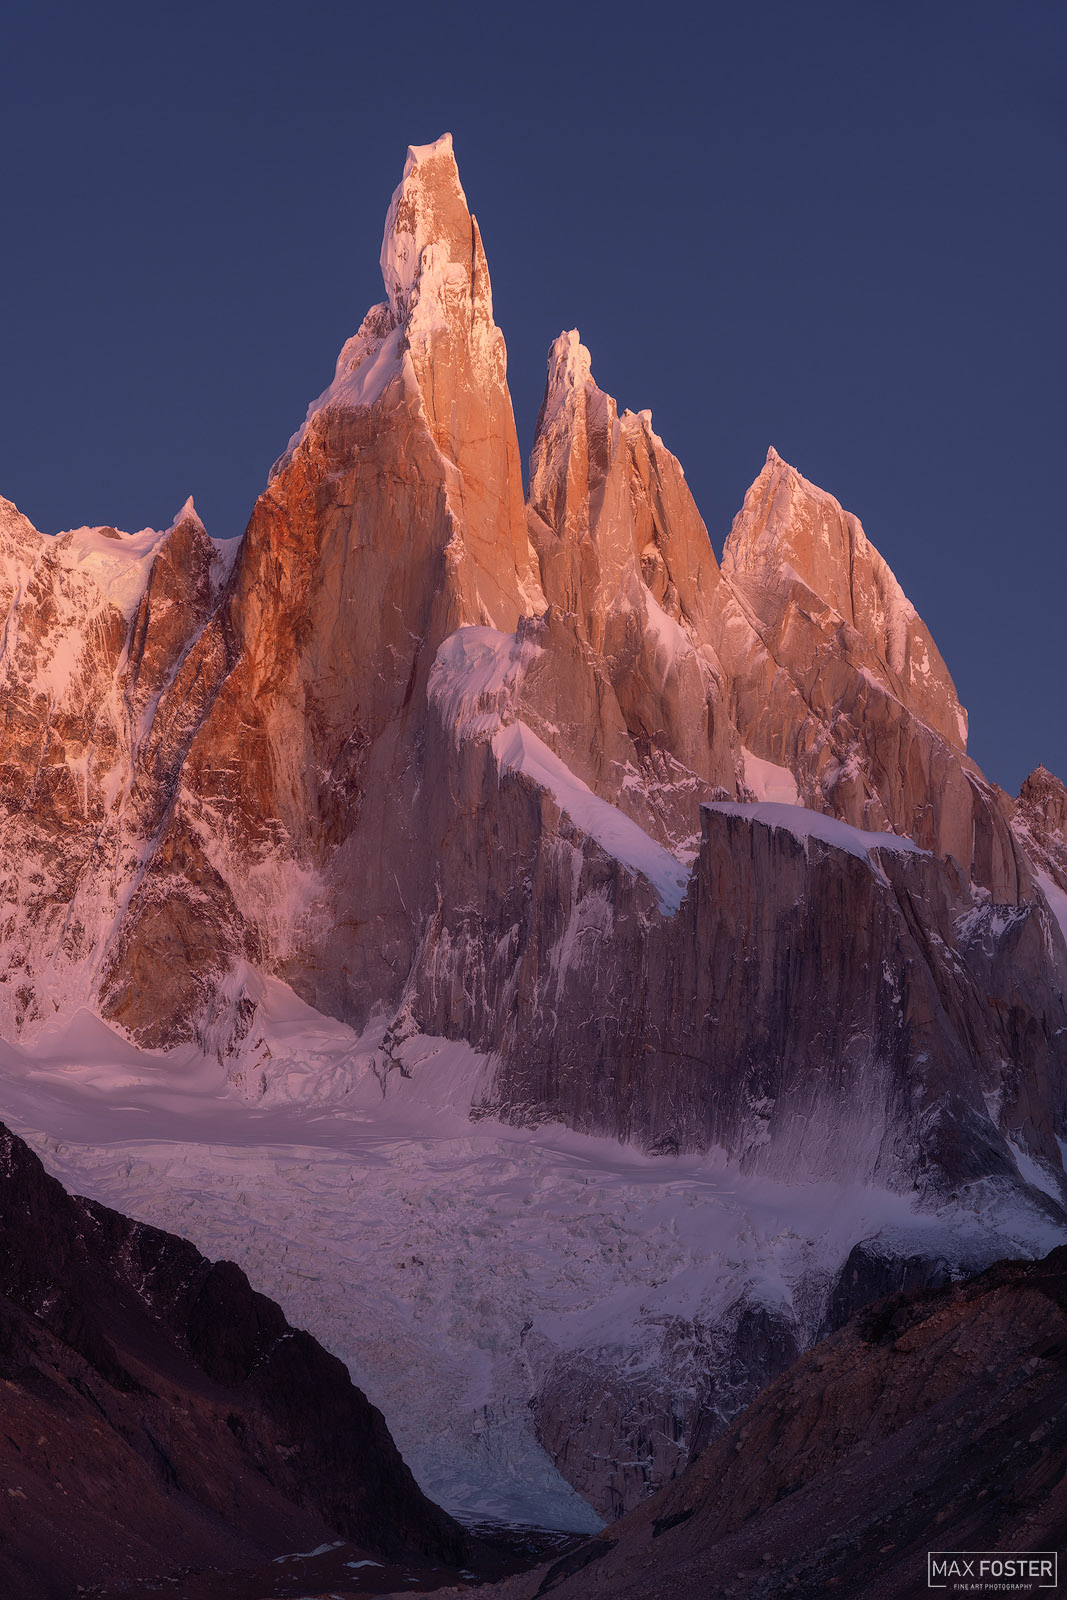 Transform your living space with Euphoric Heights, Max Foster's limited edition photographic print of Cerro Torre in Los Glaciares...